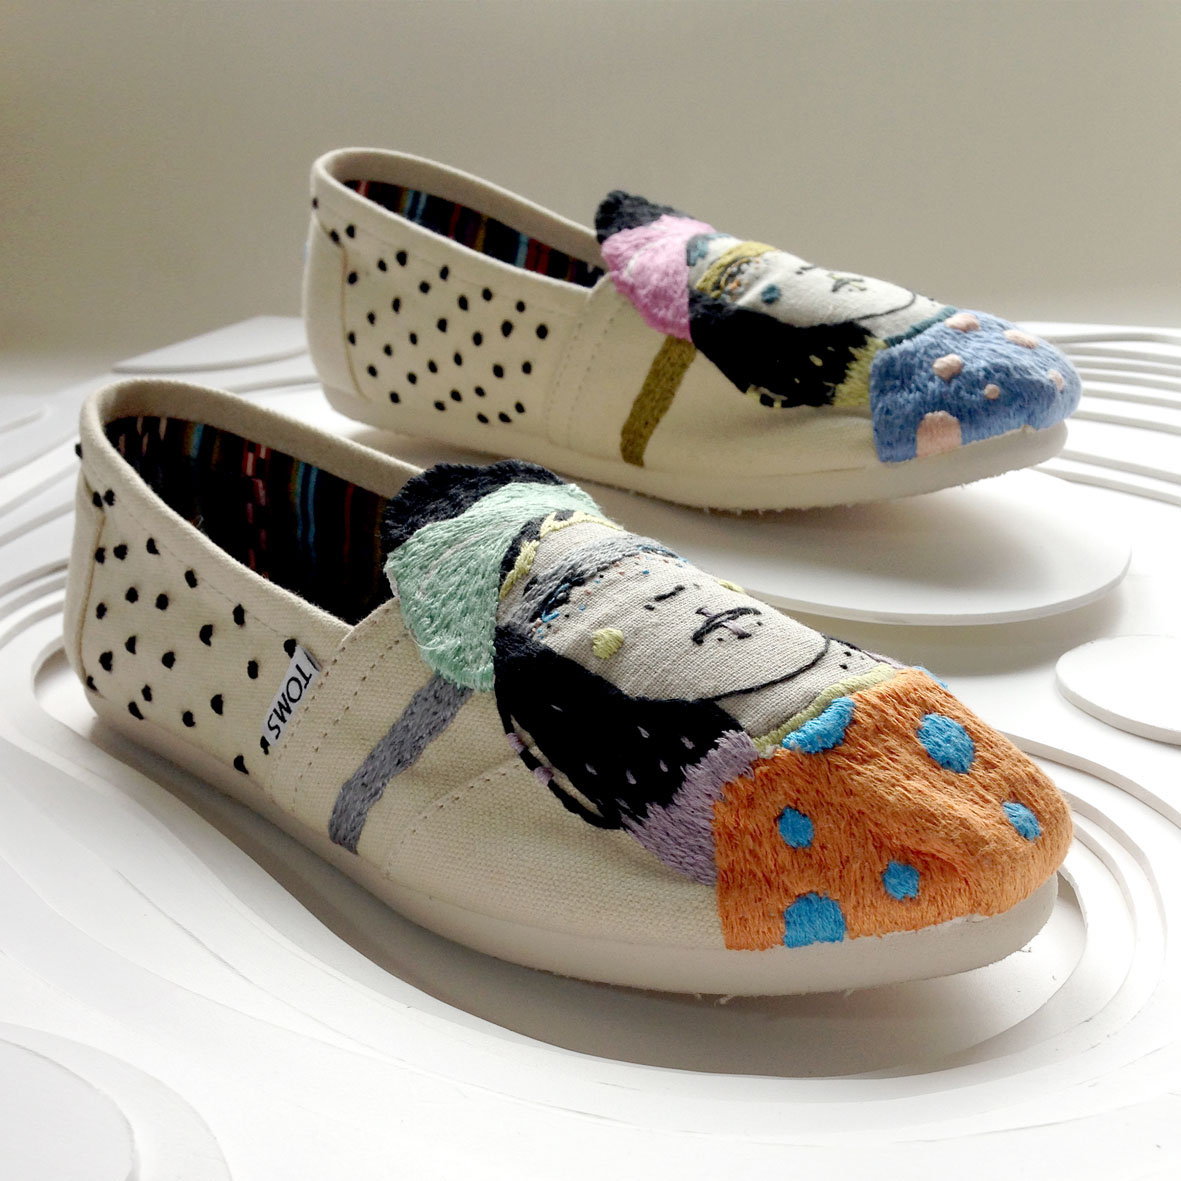 TOMS nengiren handembroidery shies charity